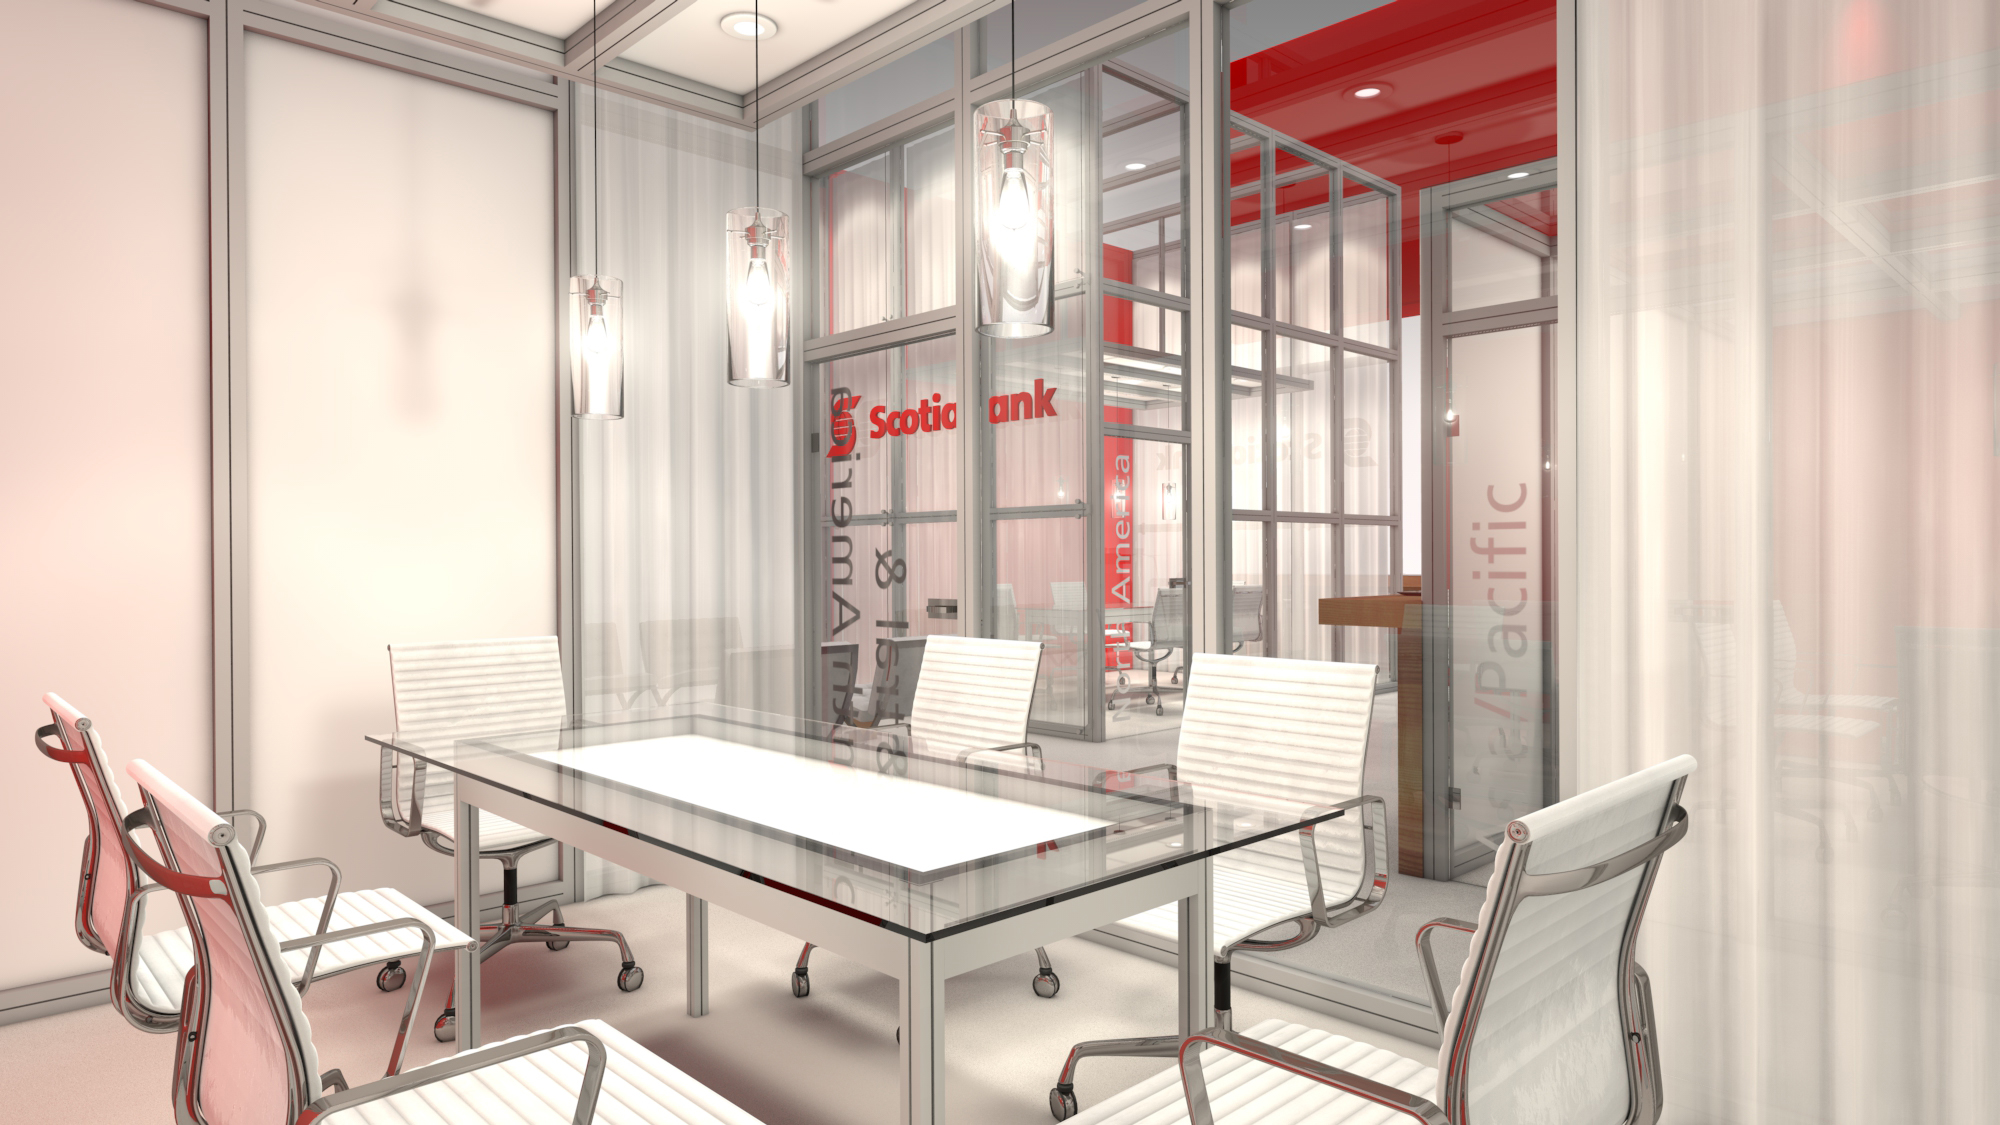  This 40' x 40' exhibit was designed to meet their three main objectives of delivering integrated communication, facilitating meetings, and creating a high impact experience. With a clean, sleek and modern booth - it showcases Scotiabank as an indust